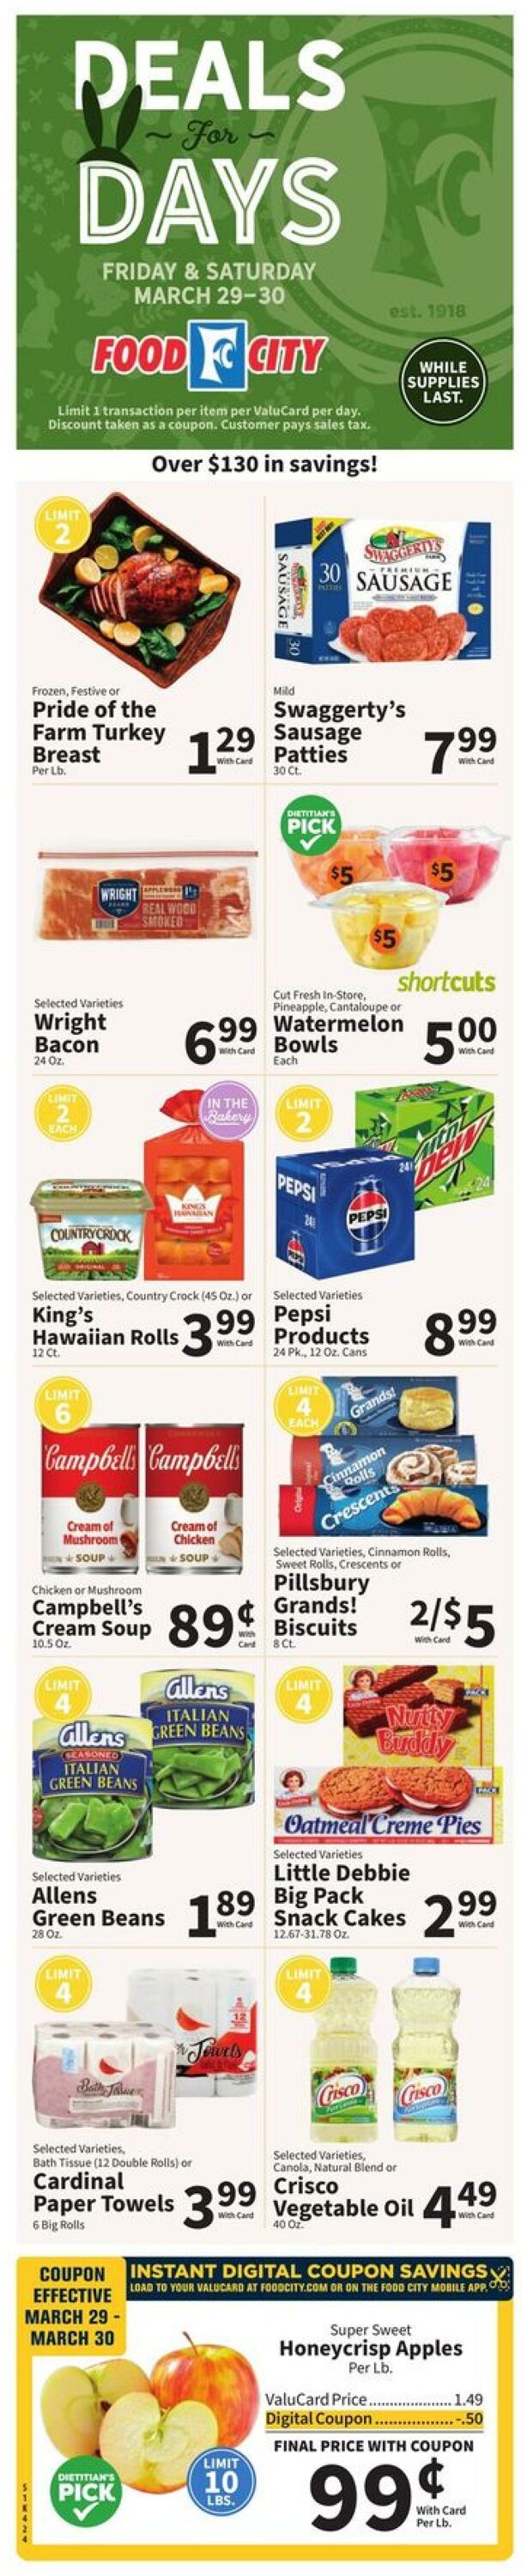 Food City Promotional weekly ads